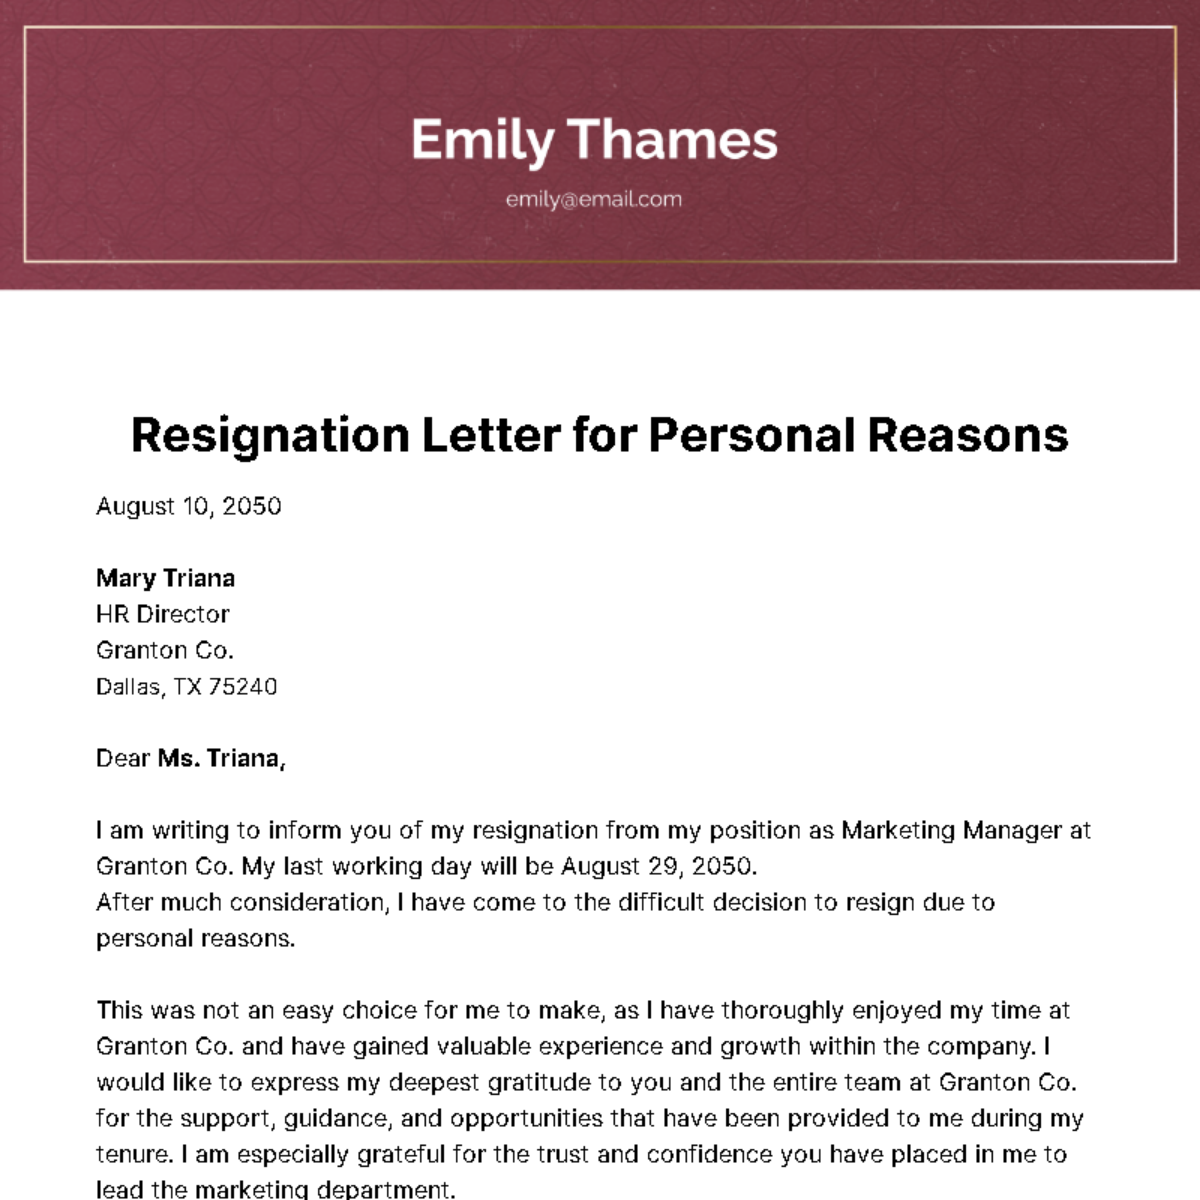 Resignation Letter for Personal Reasons Template